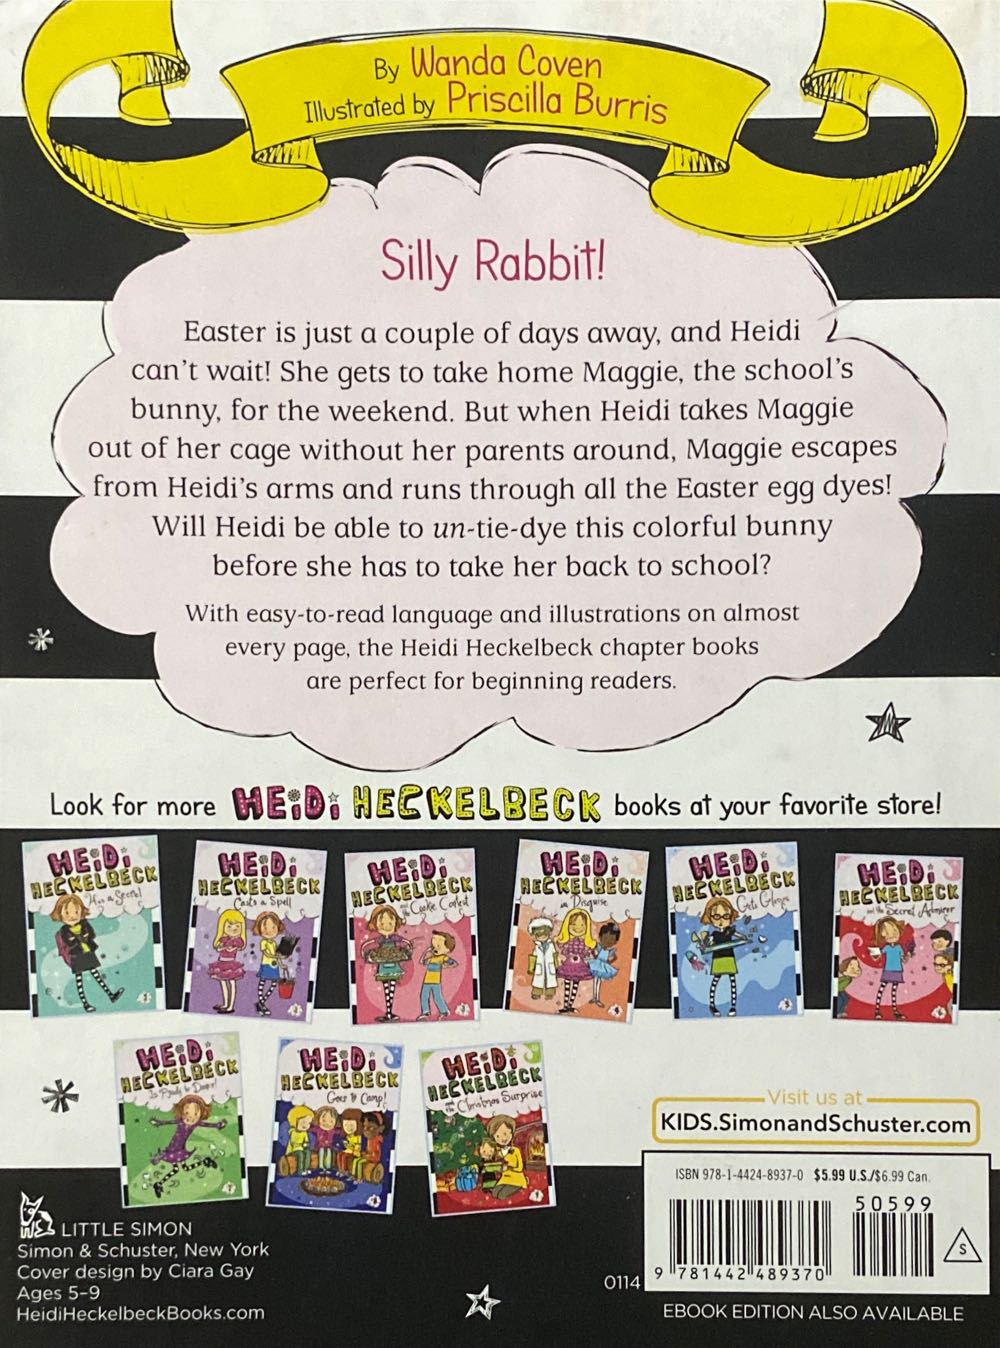 Heidi Heckelbeck and the Tie-Dyed Bunny - Wanda Coven (Little Simon - Paperback) book collectible [Barcode 9781442489370] - Main Image 2